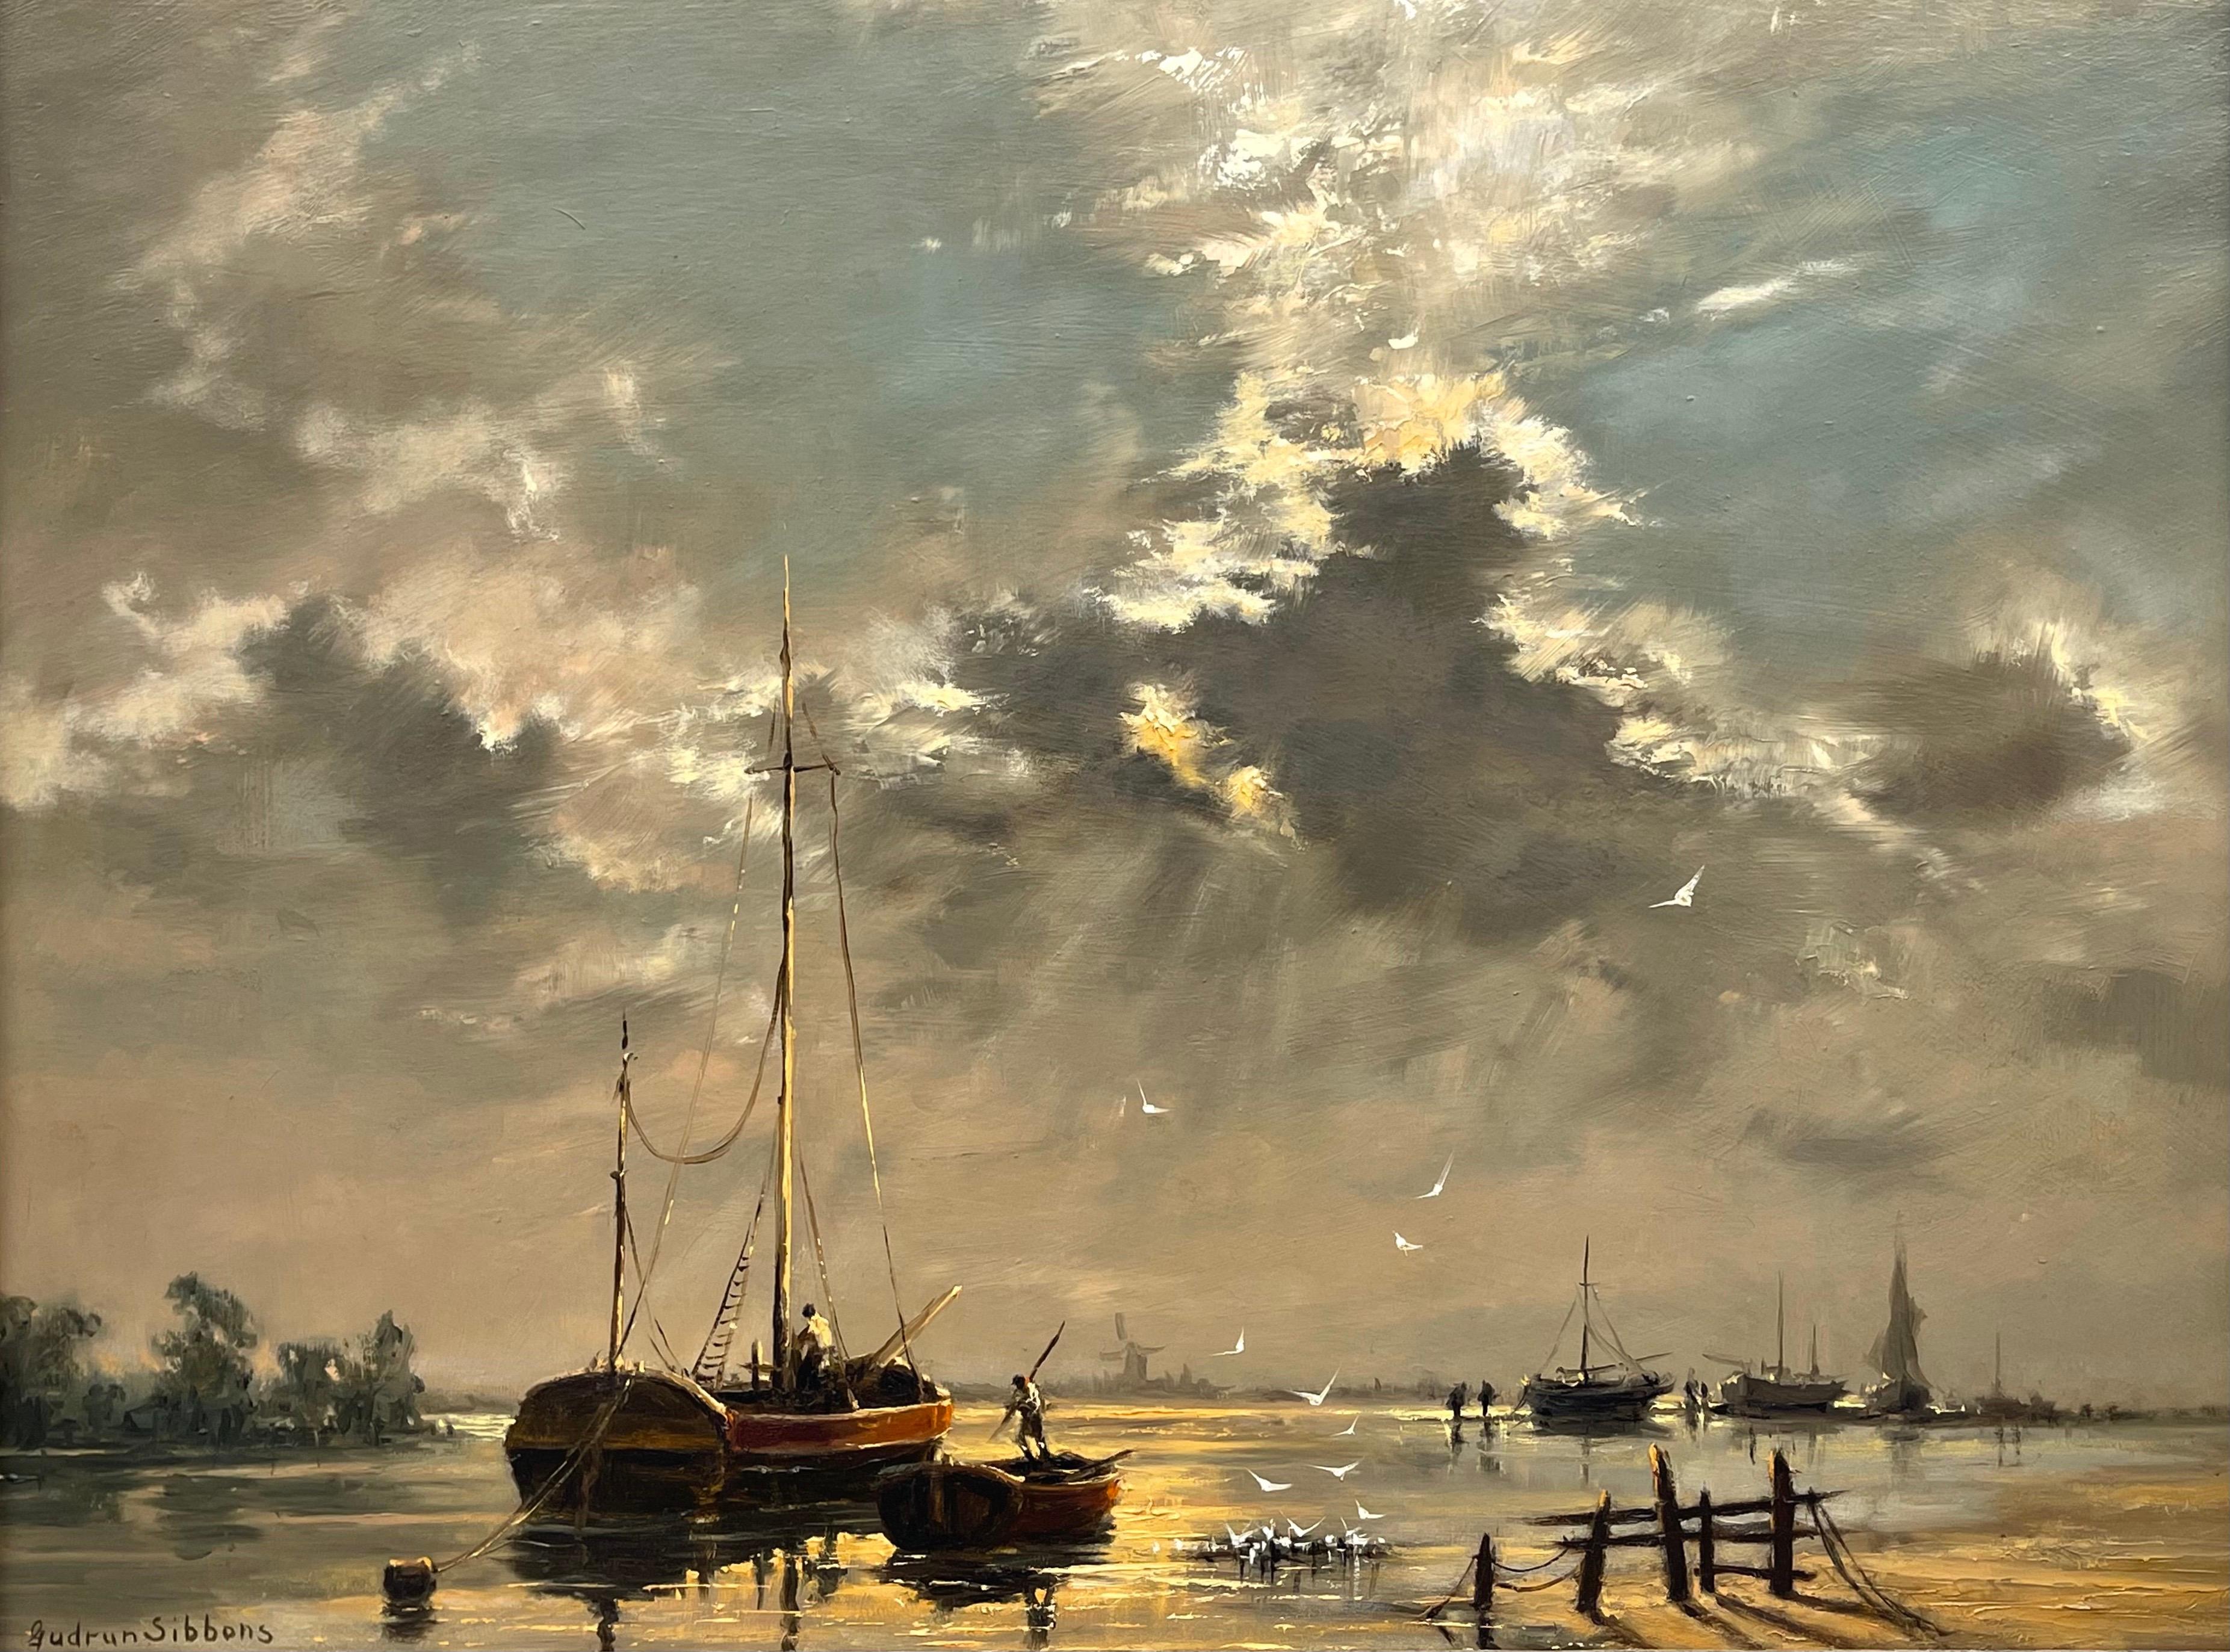 Oil Painting of Evening Scene with Moored Boats in Estuary by British Artist - Brown Landscape Painting by Gudrun Sibbons